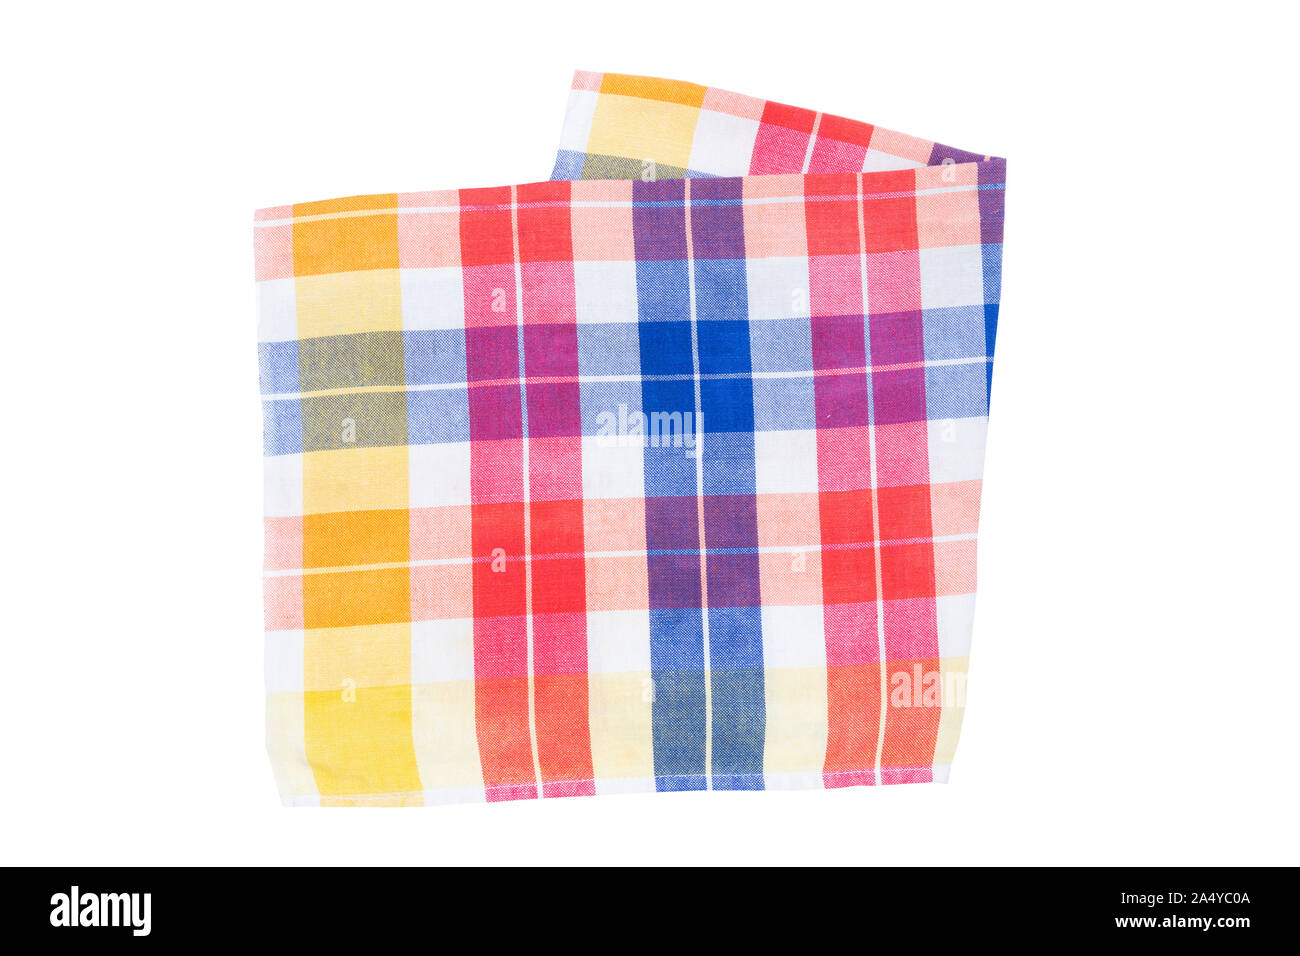 https://c8.alamy.com/comp/2A4YC0A/closeup-of-a-blue-white-red-yellow-and-orange-checkered-napkin-or-tablecloth-isolated-on-white-background-dishtowels-are-kitchen-accessories-2A4YC0A.jpg